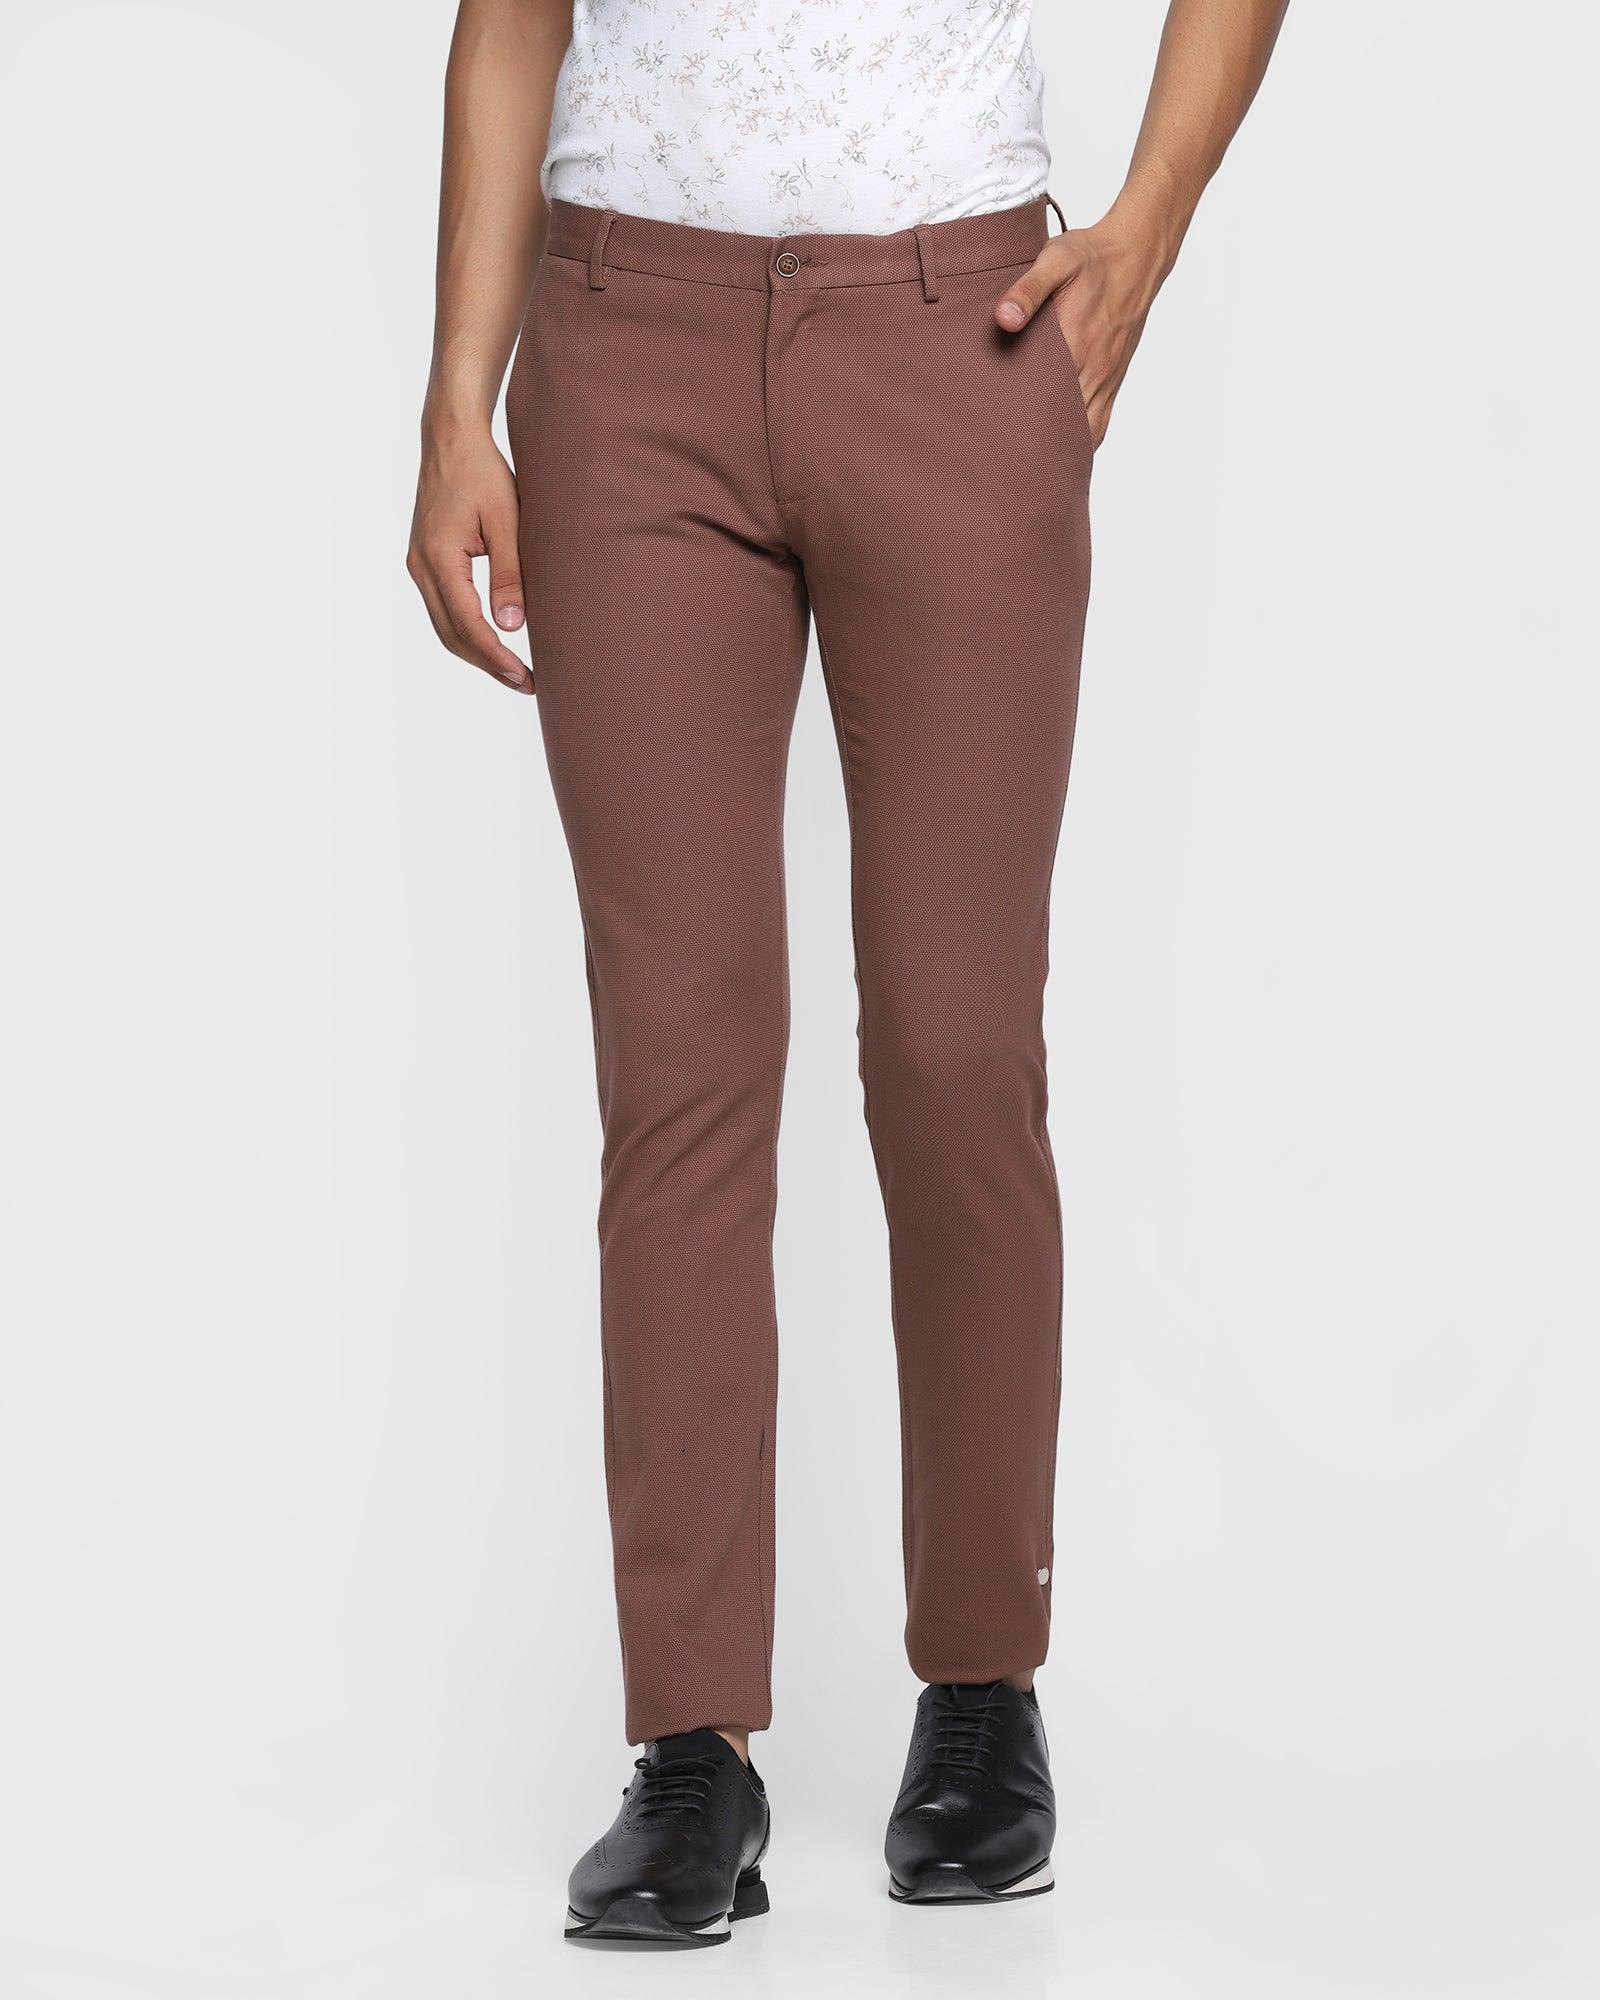 Slim Fit B-91 Casual Rust Solid Khakis - Canopus